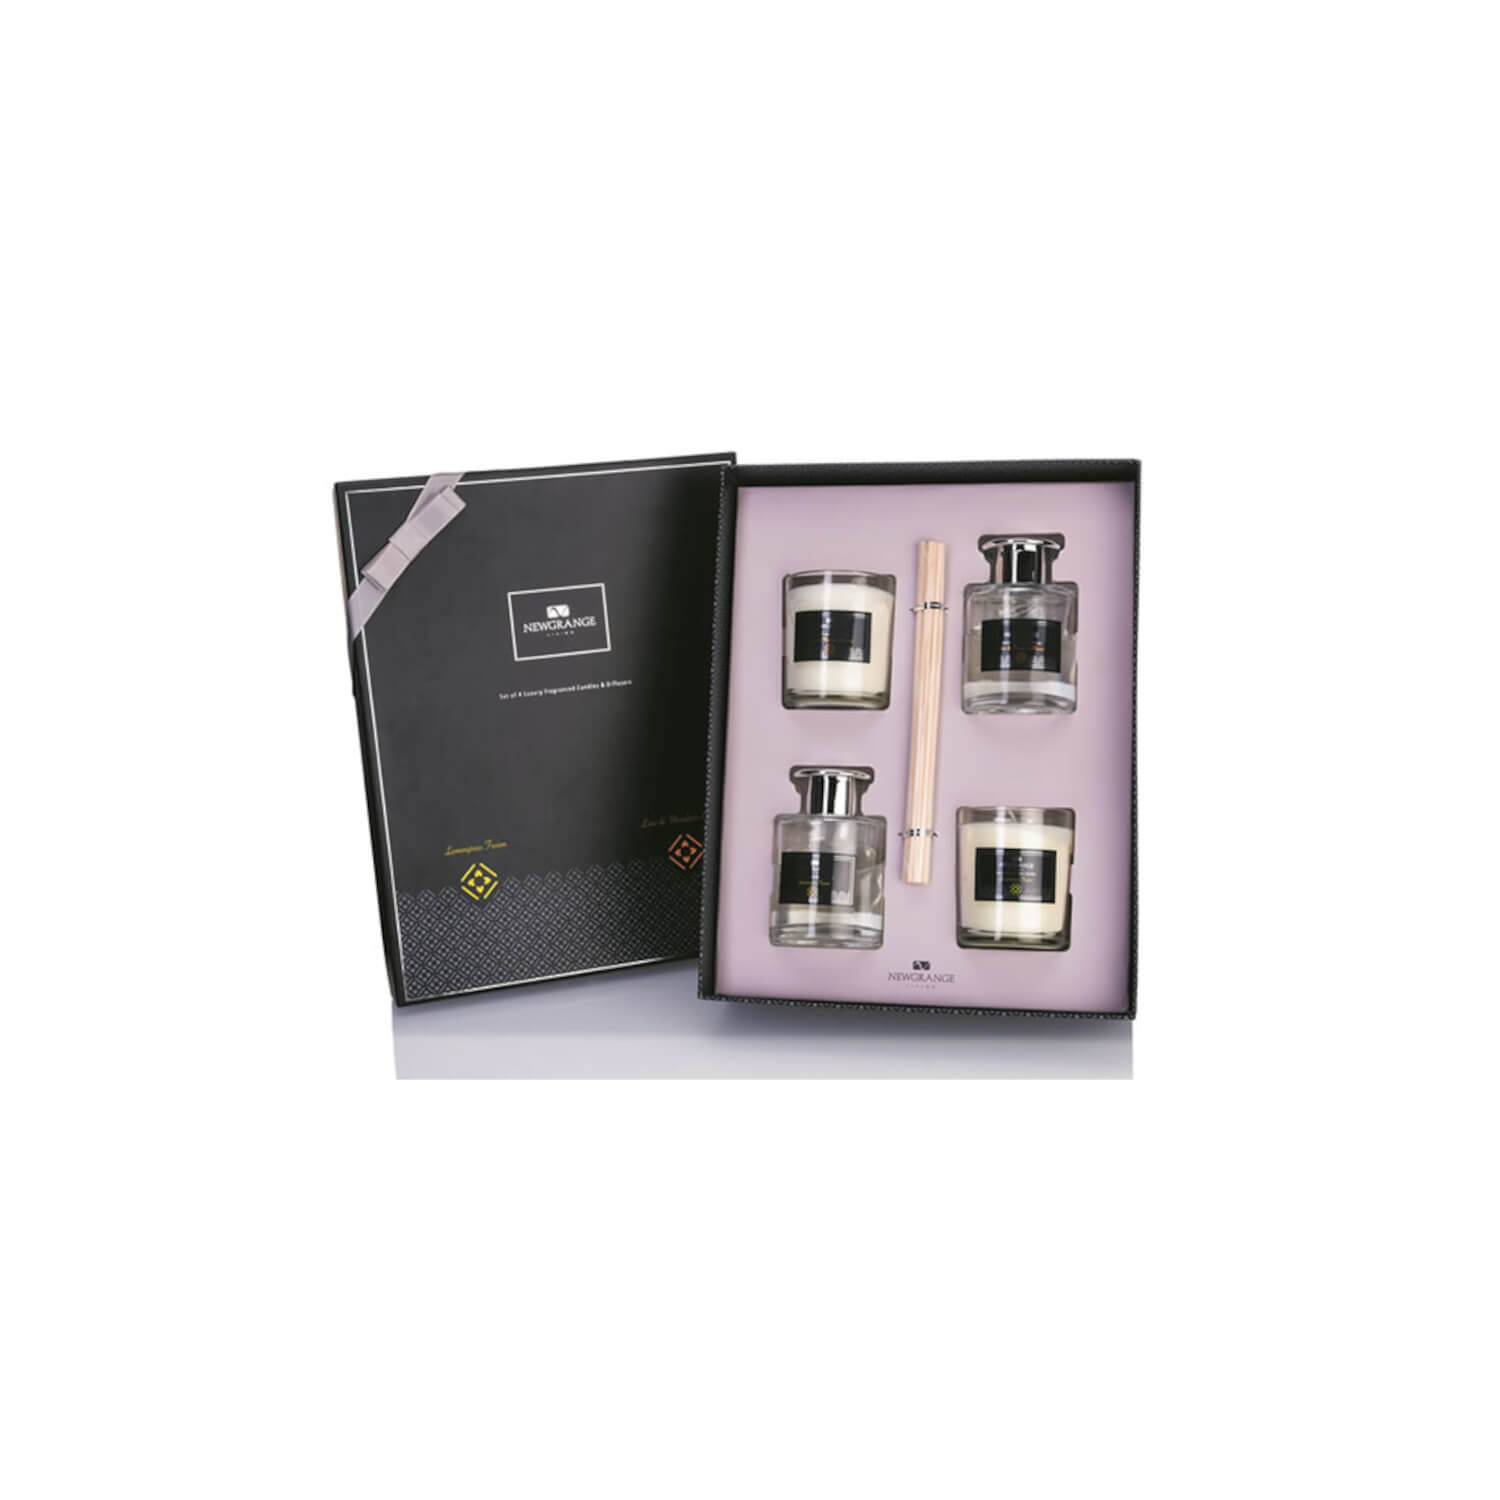 Shaws Department Stores Luxury Candle &amp; Diffuser Set of 4 1 Shaws Department Stores